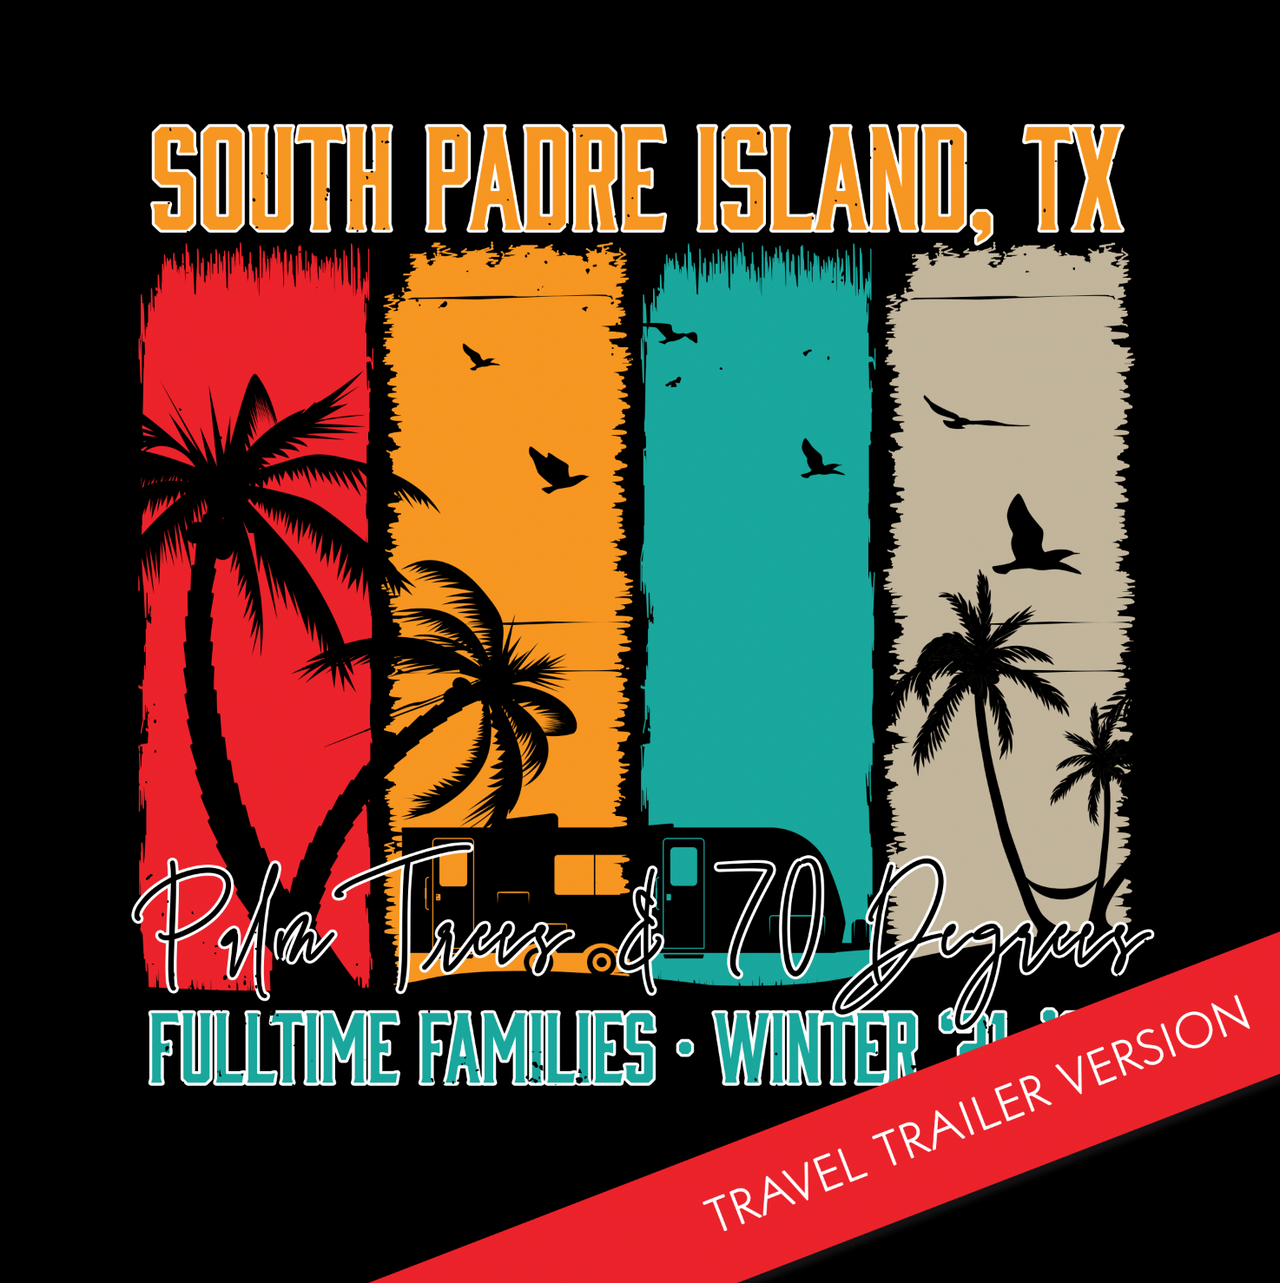 Fulltime Families South Padre Island Winter '21-'22 Limited Edition Shirt- Travel Trailer Kids Shirt